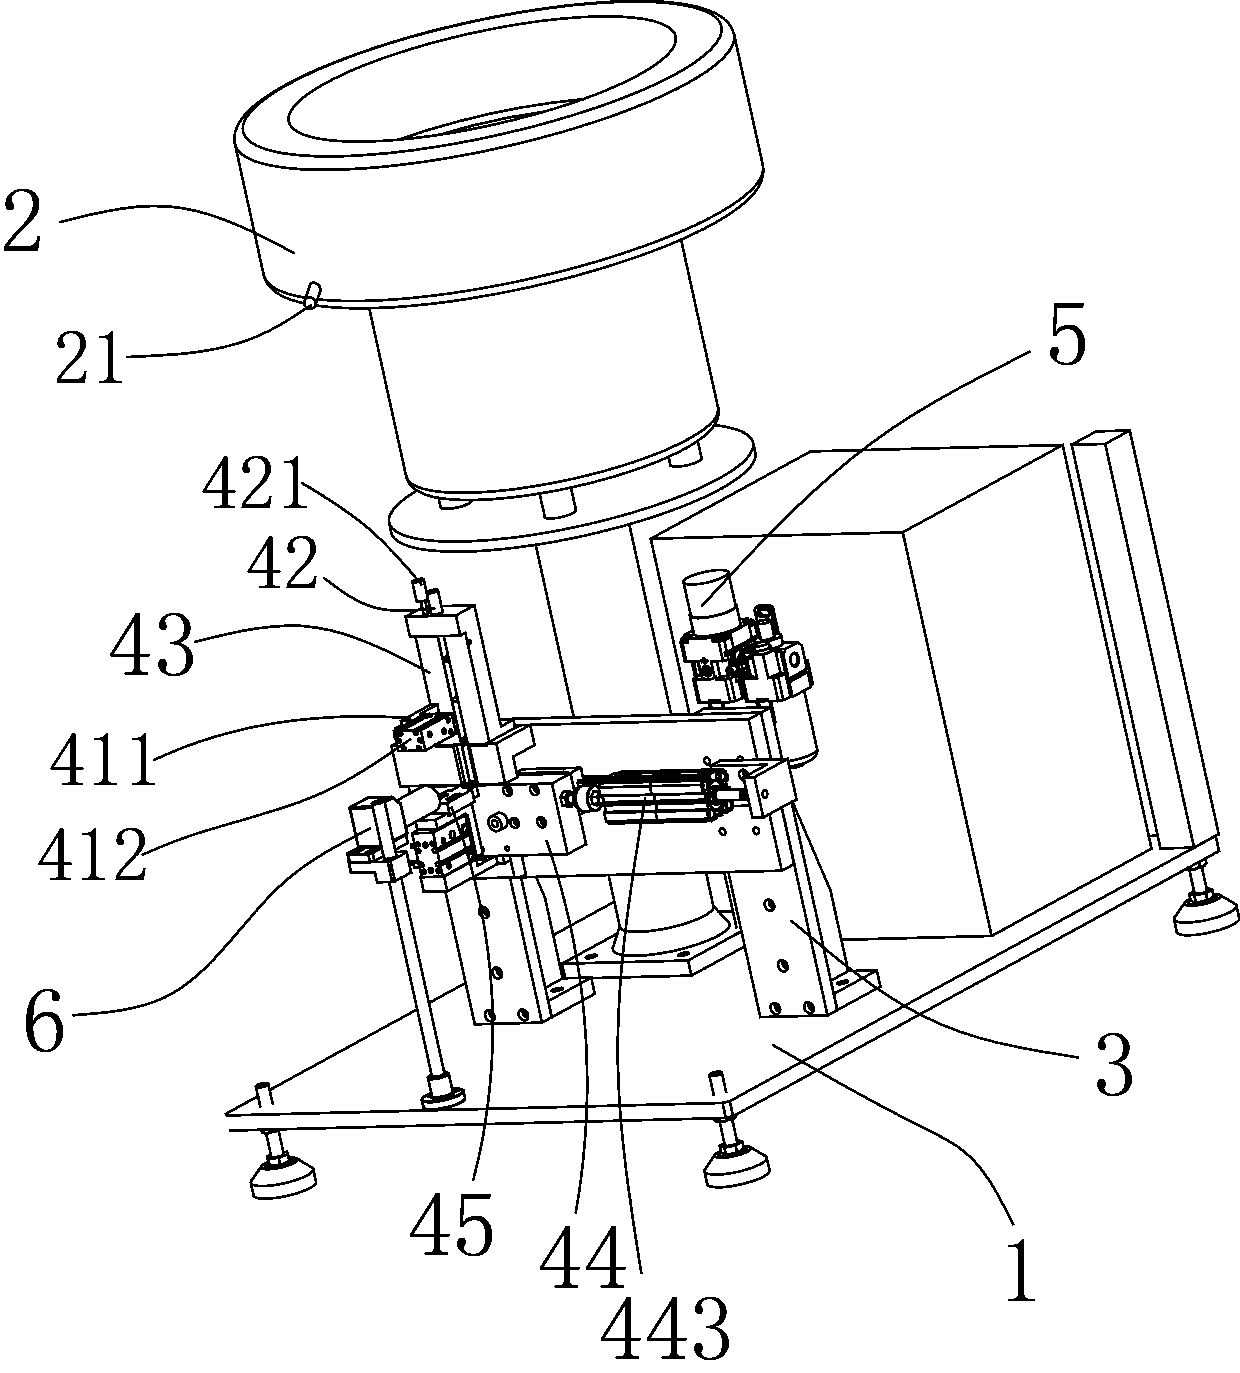 A two-way distributing device